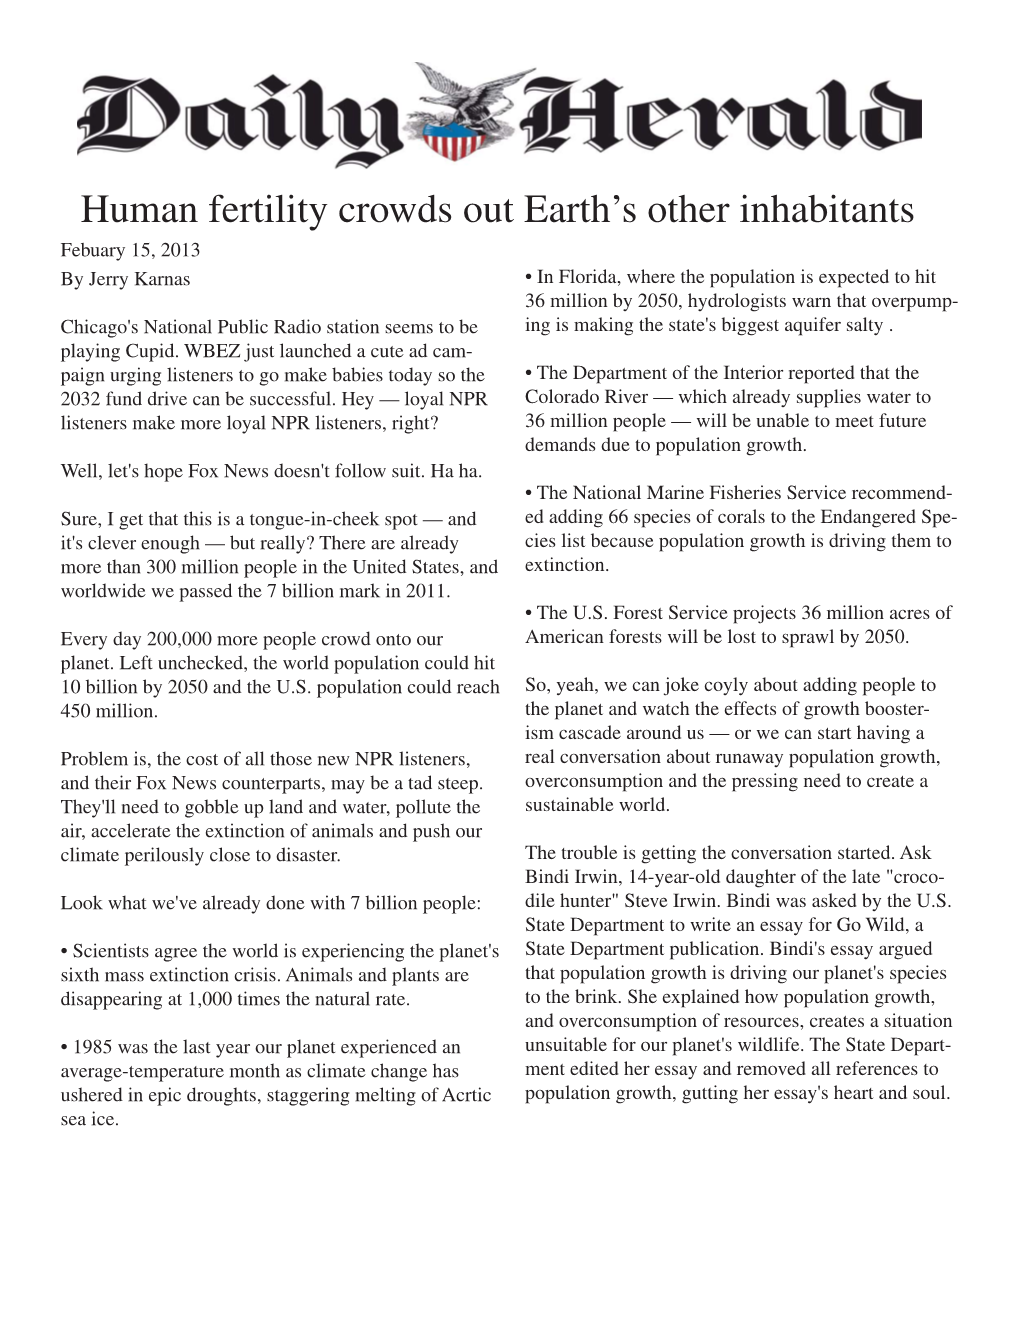 Human Fertility Crowds out Earth's Other Inhabitants